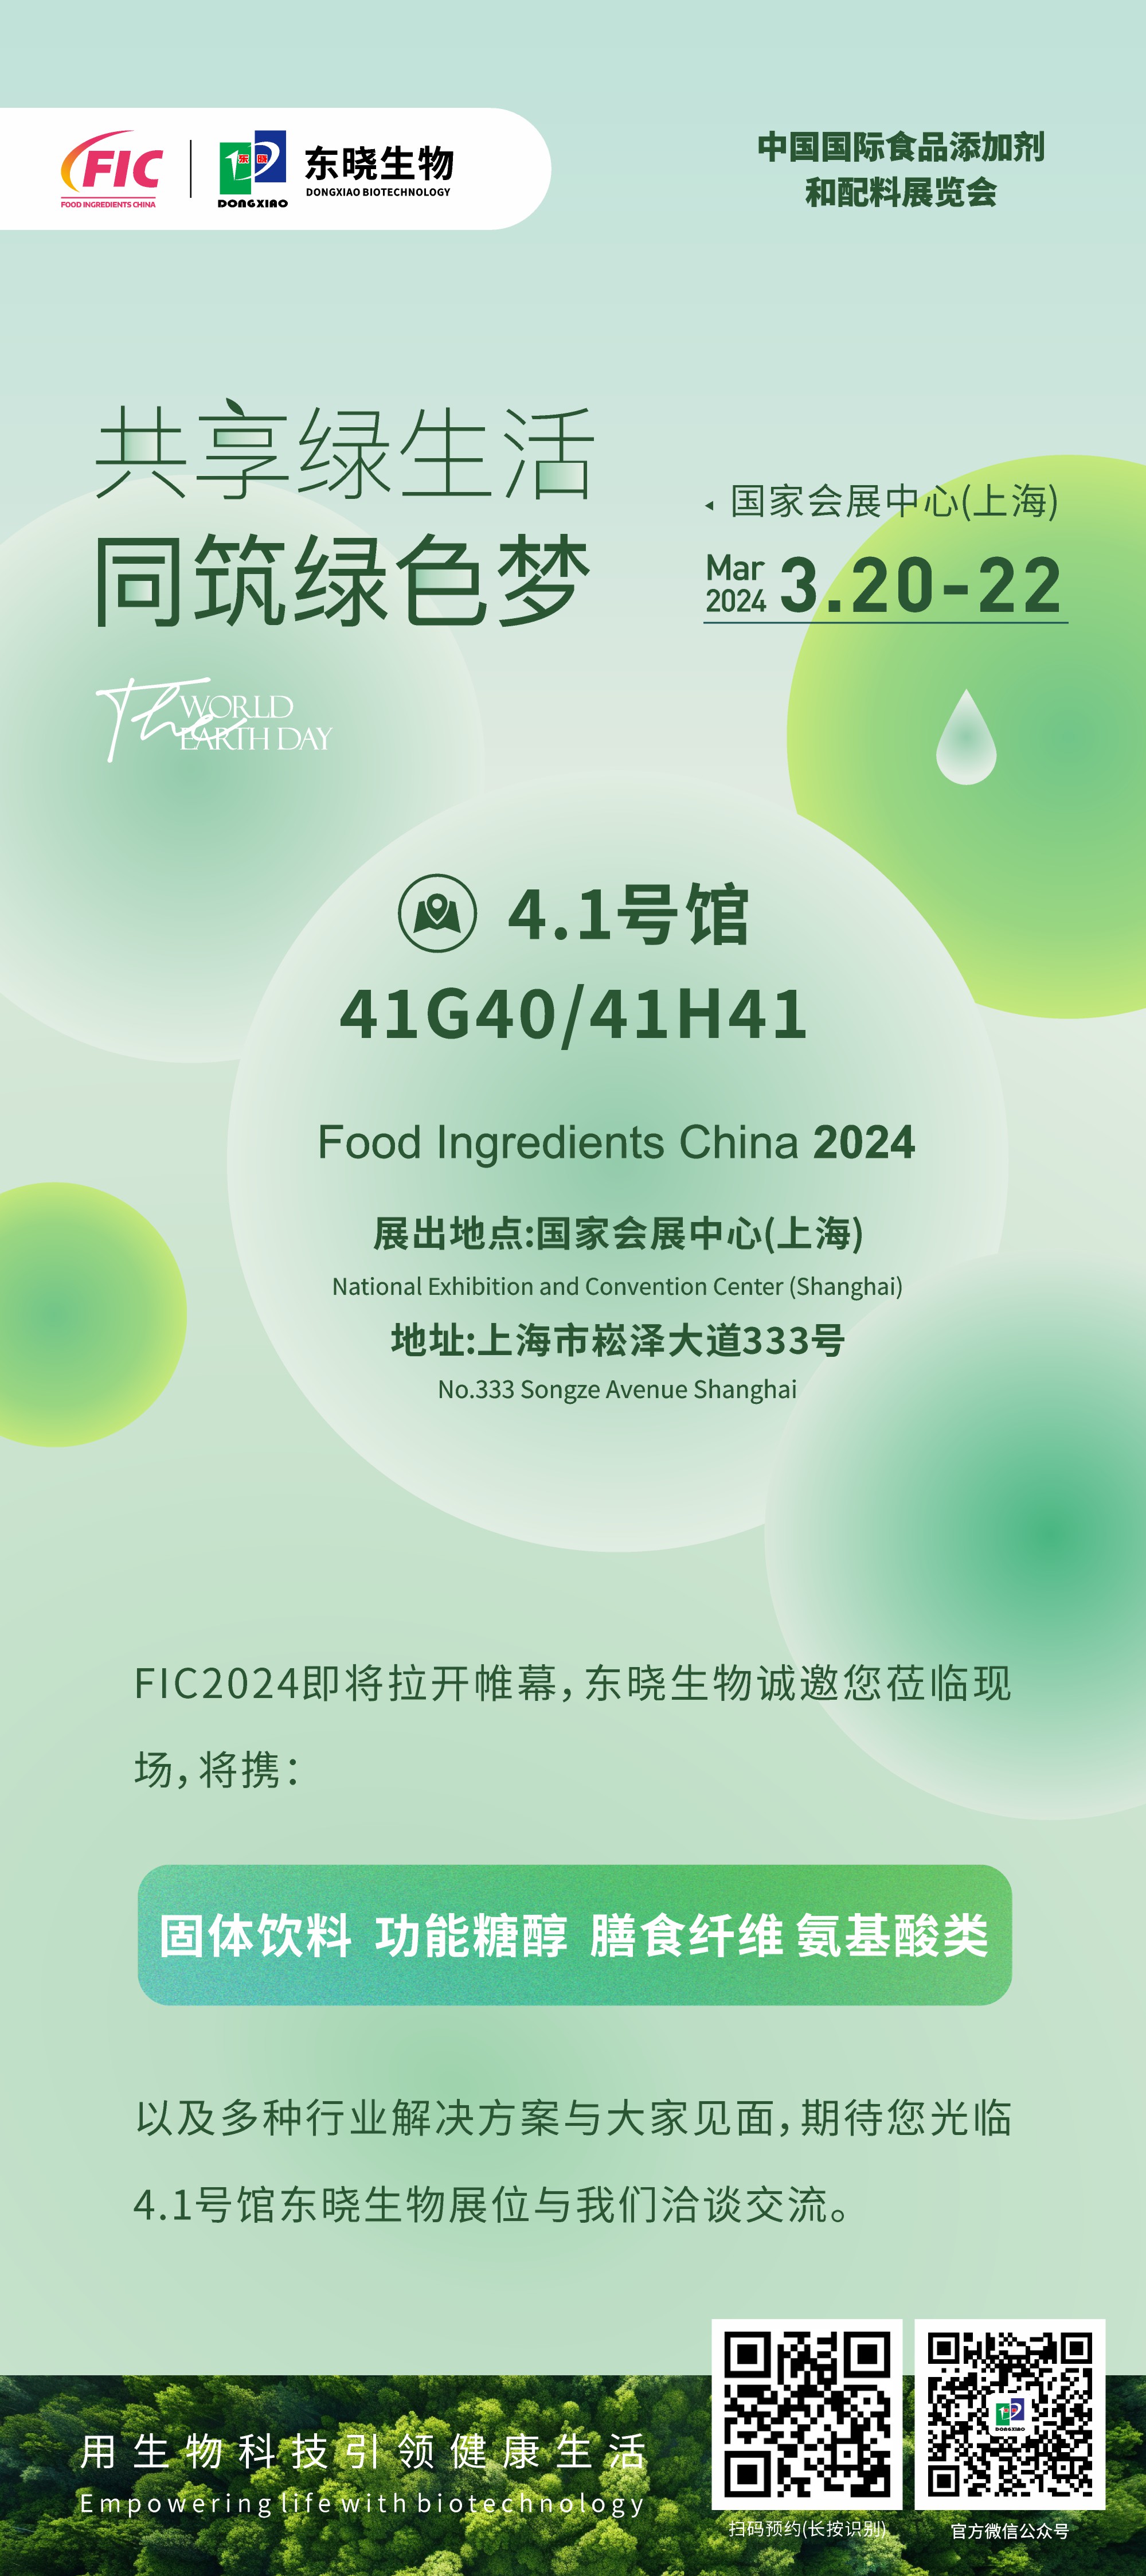 Exhibition Notice 2024 Shanghai FIC Dongxiao Biology invites you to participate